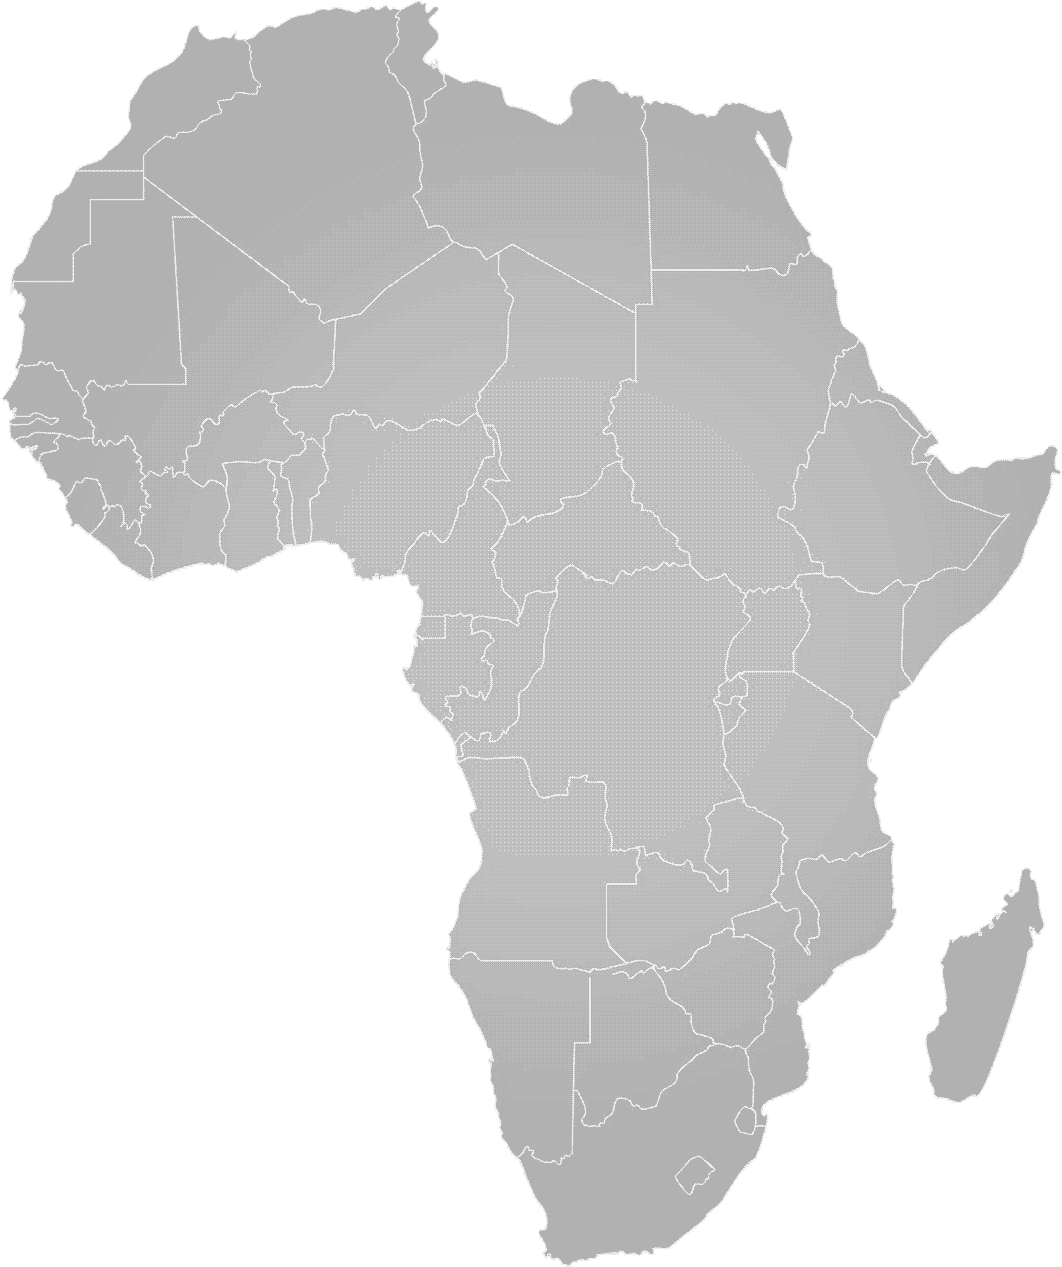 Africa-Map-PNG-Free-Download-1